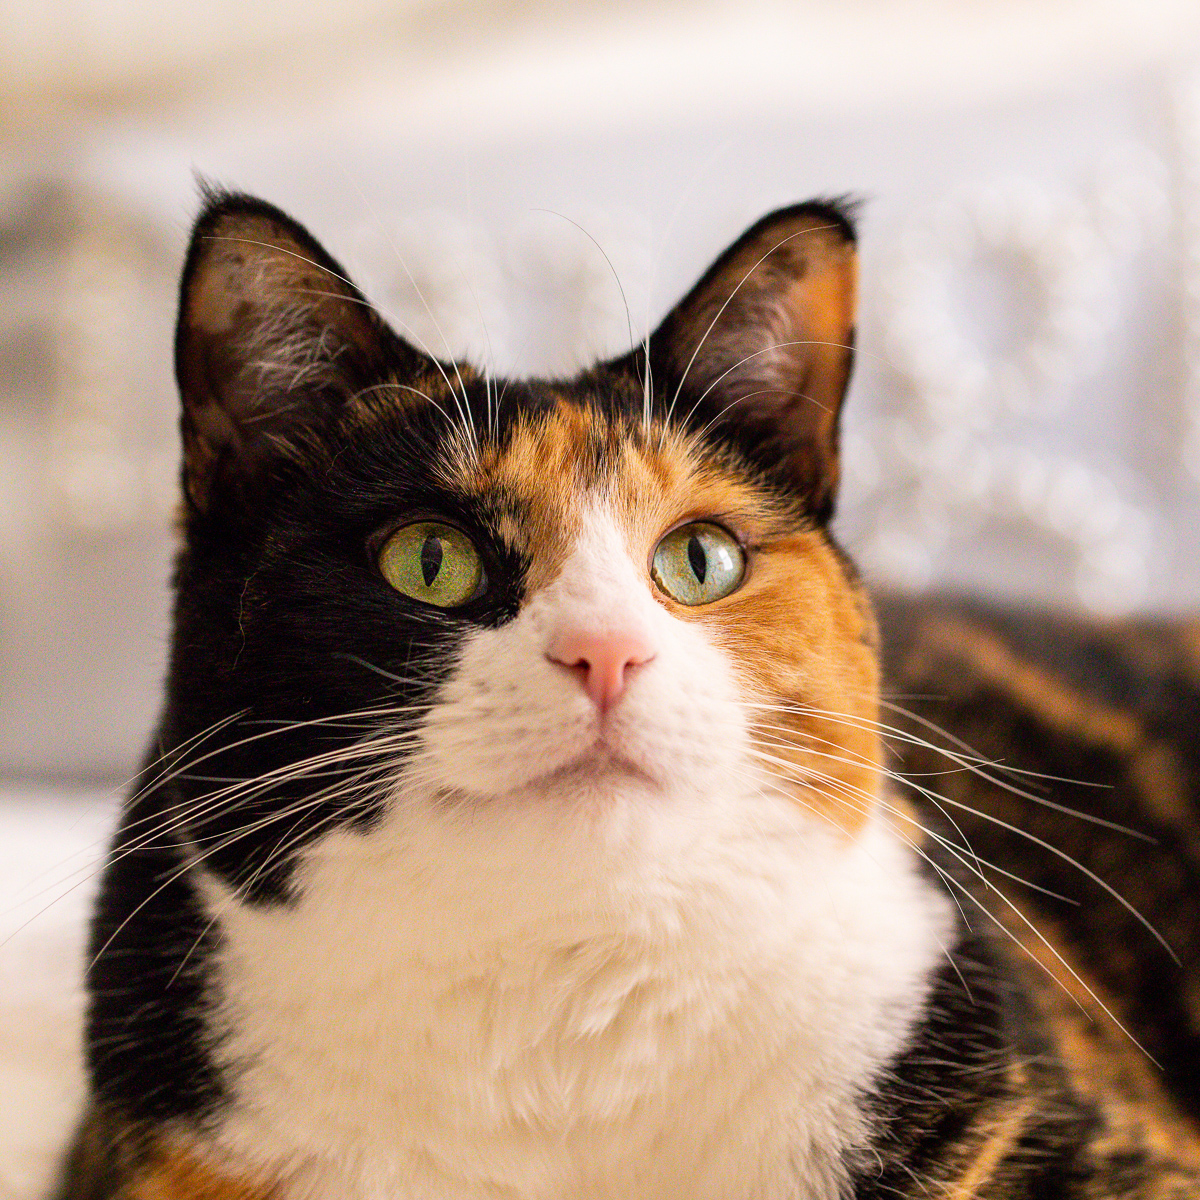 Calico cat looking up.